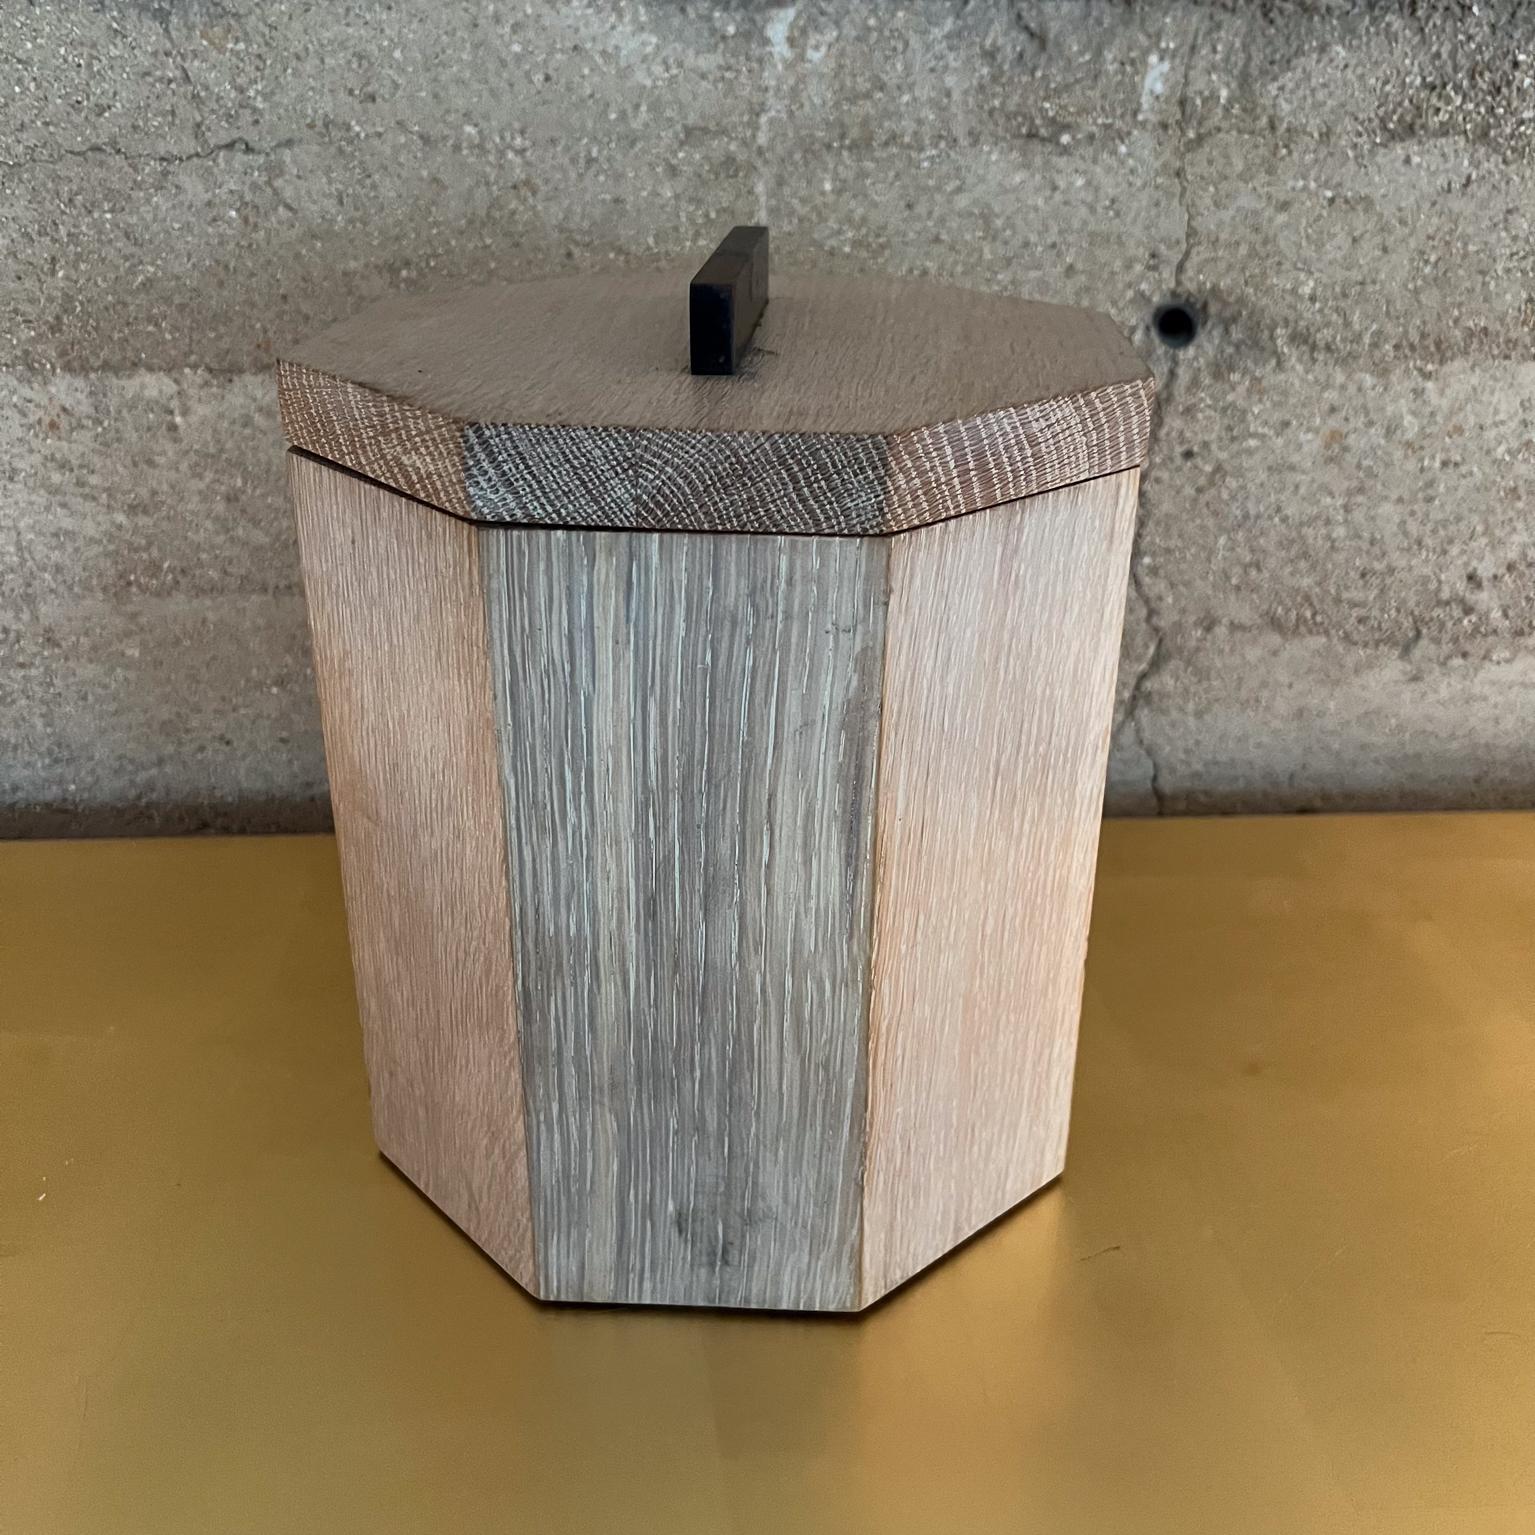 Vollrath Ice Bucket Stainless and White Oak from Wisconsin
maker stamped
9.75 h x 7.75 diameter
Modern Geometric Solid White Oak Ice Bucket with stainless steel liner
eco-friendly urban wood
Preowned original unrestored vintage
Refer to images